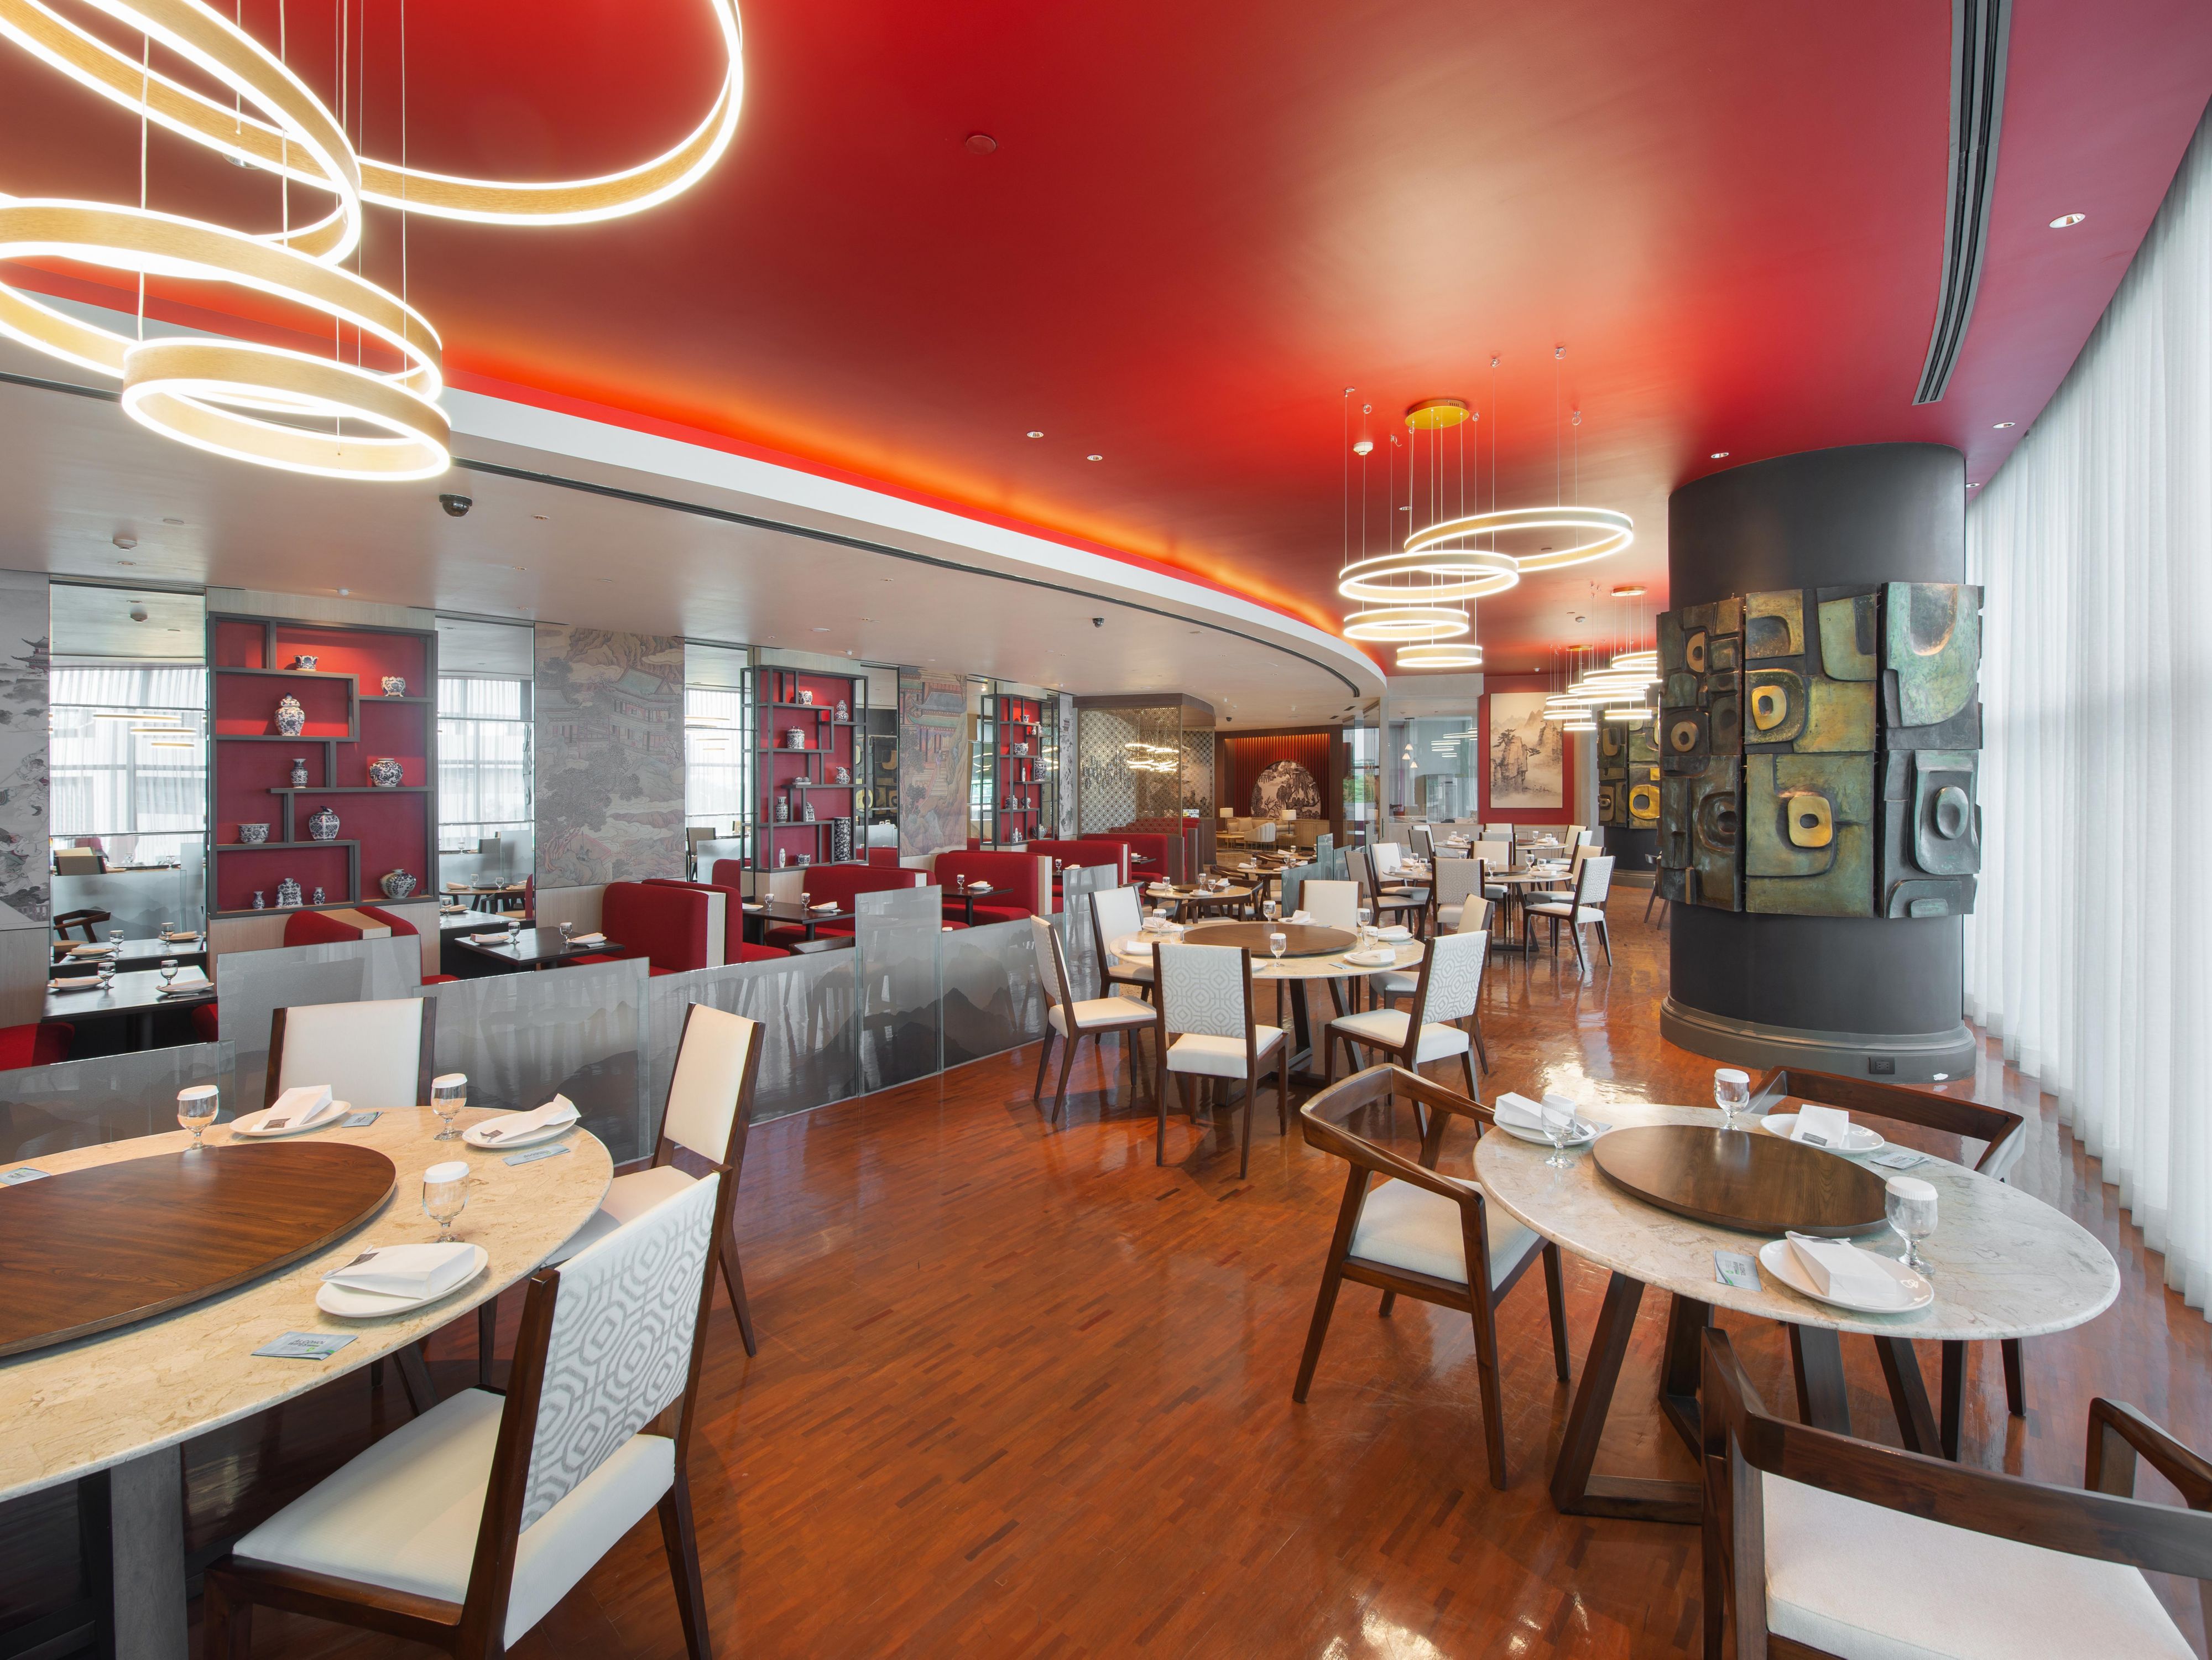 Xin Tian Di is Crowne Plaza Manila Galleria's highly acclaimed flagship Chinese restaurant offering authentic Cantonese-style dishes, including our aromatic signature Oven-Roasted Duck, barbecued meats, vegetables, and a wide array of Dim Sum specialities. 
Reserve a table at +63-2- 87903100.